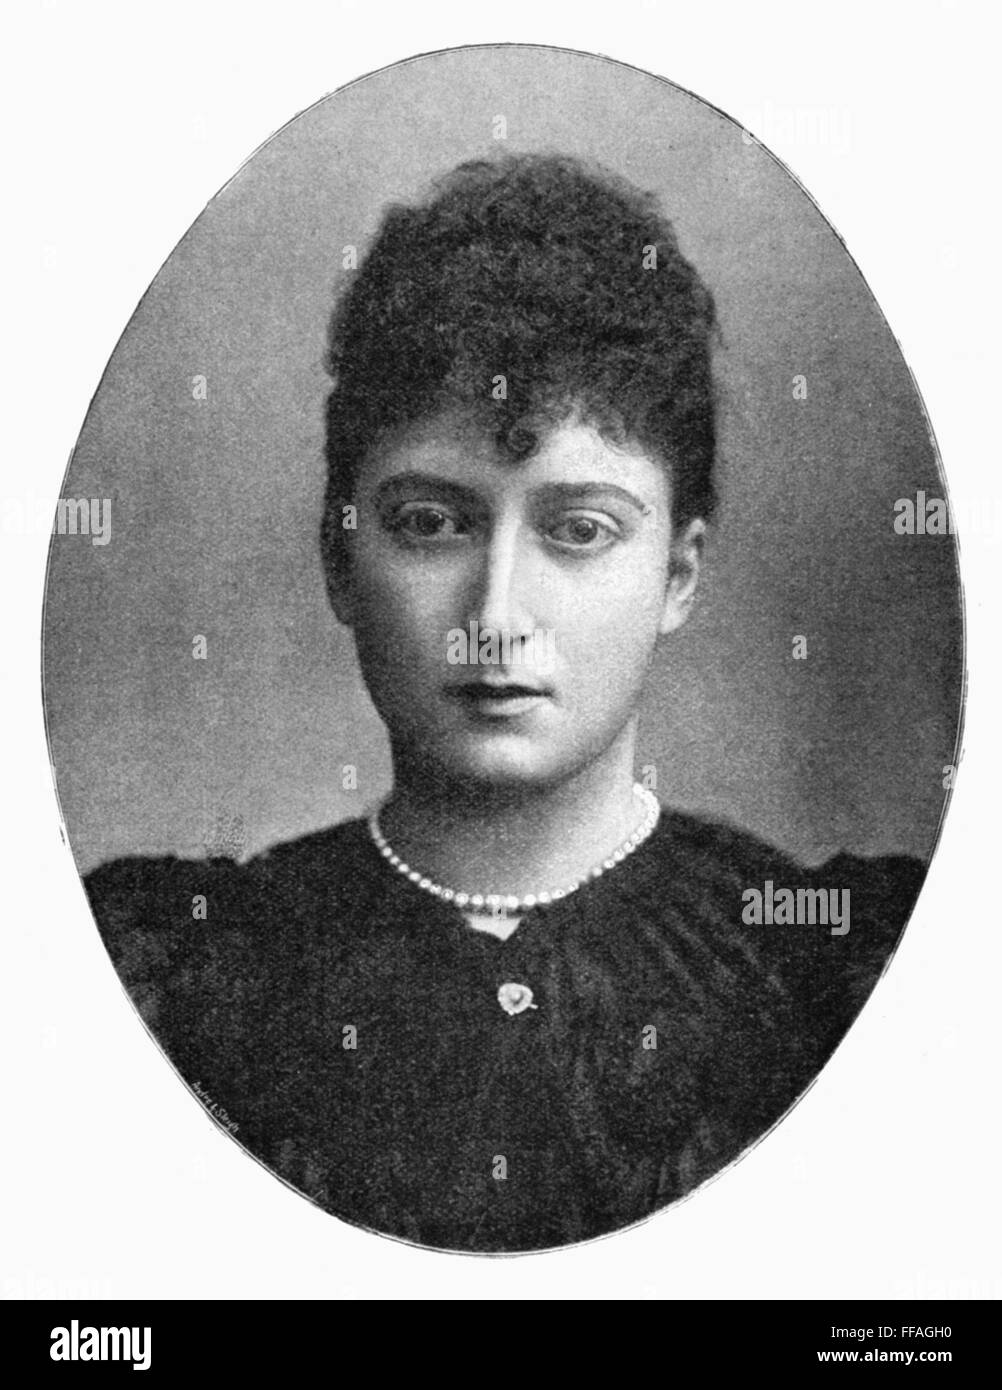 MAUD, QUEEN OF NORWAY /n(1869-1938). As the Princess of Wales. Photographed in 1895, at the time of her engagement to Prince Charles of Denmark, the future King Haakon VII of Norway. Stock Photo